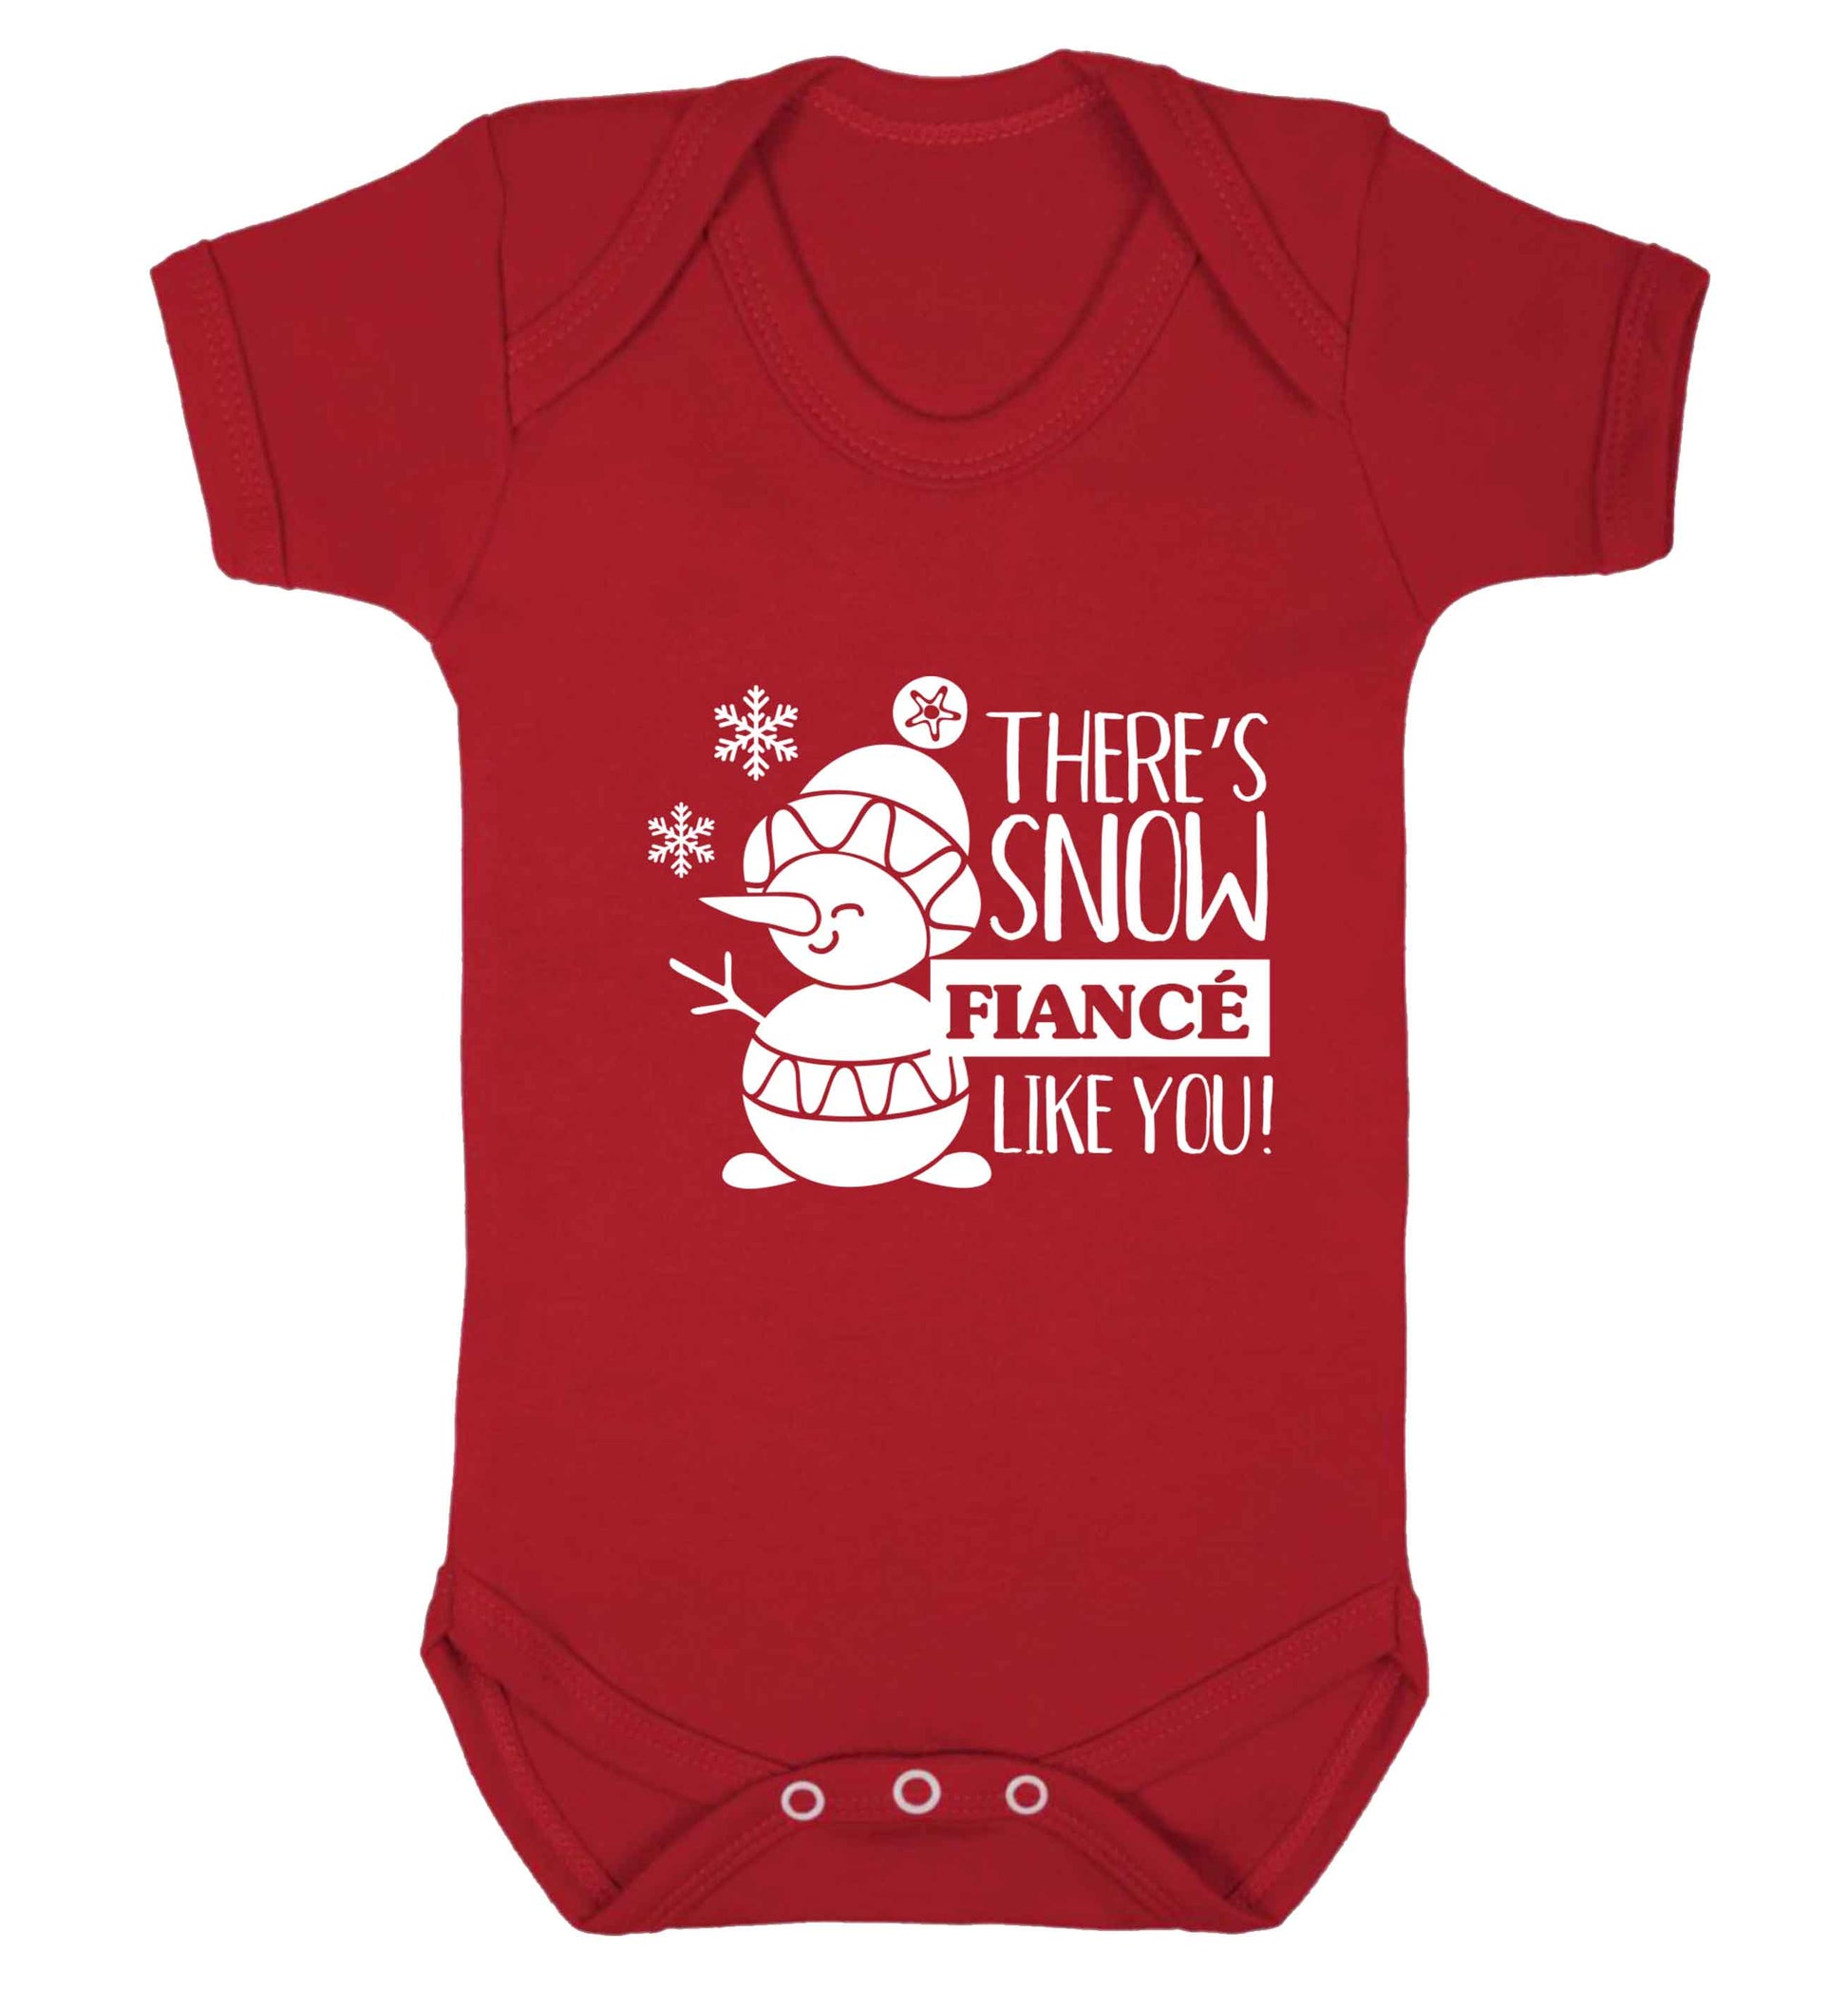 There's snow fiance like you baby vest red 18-24 months